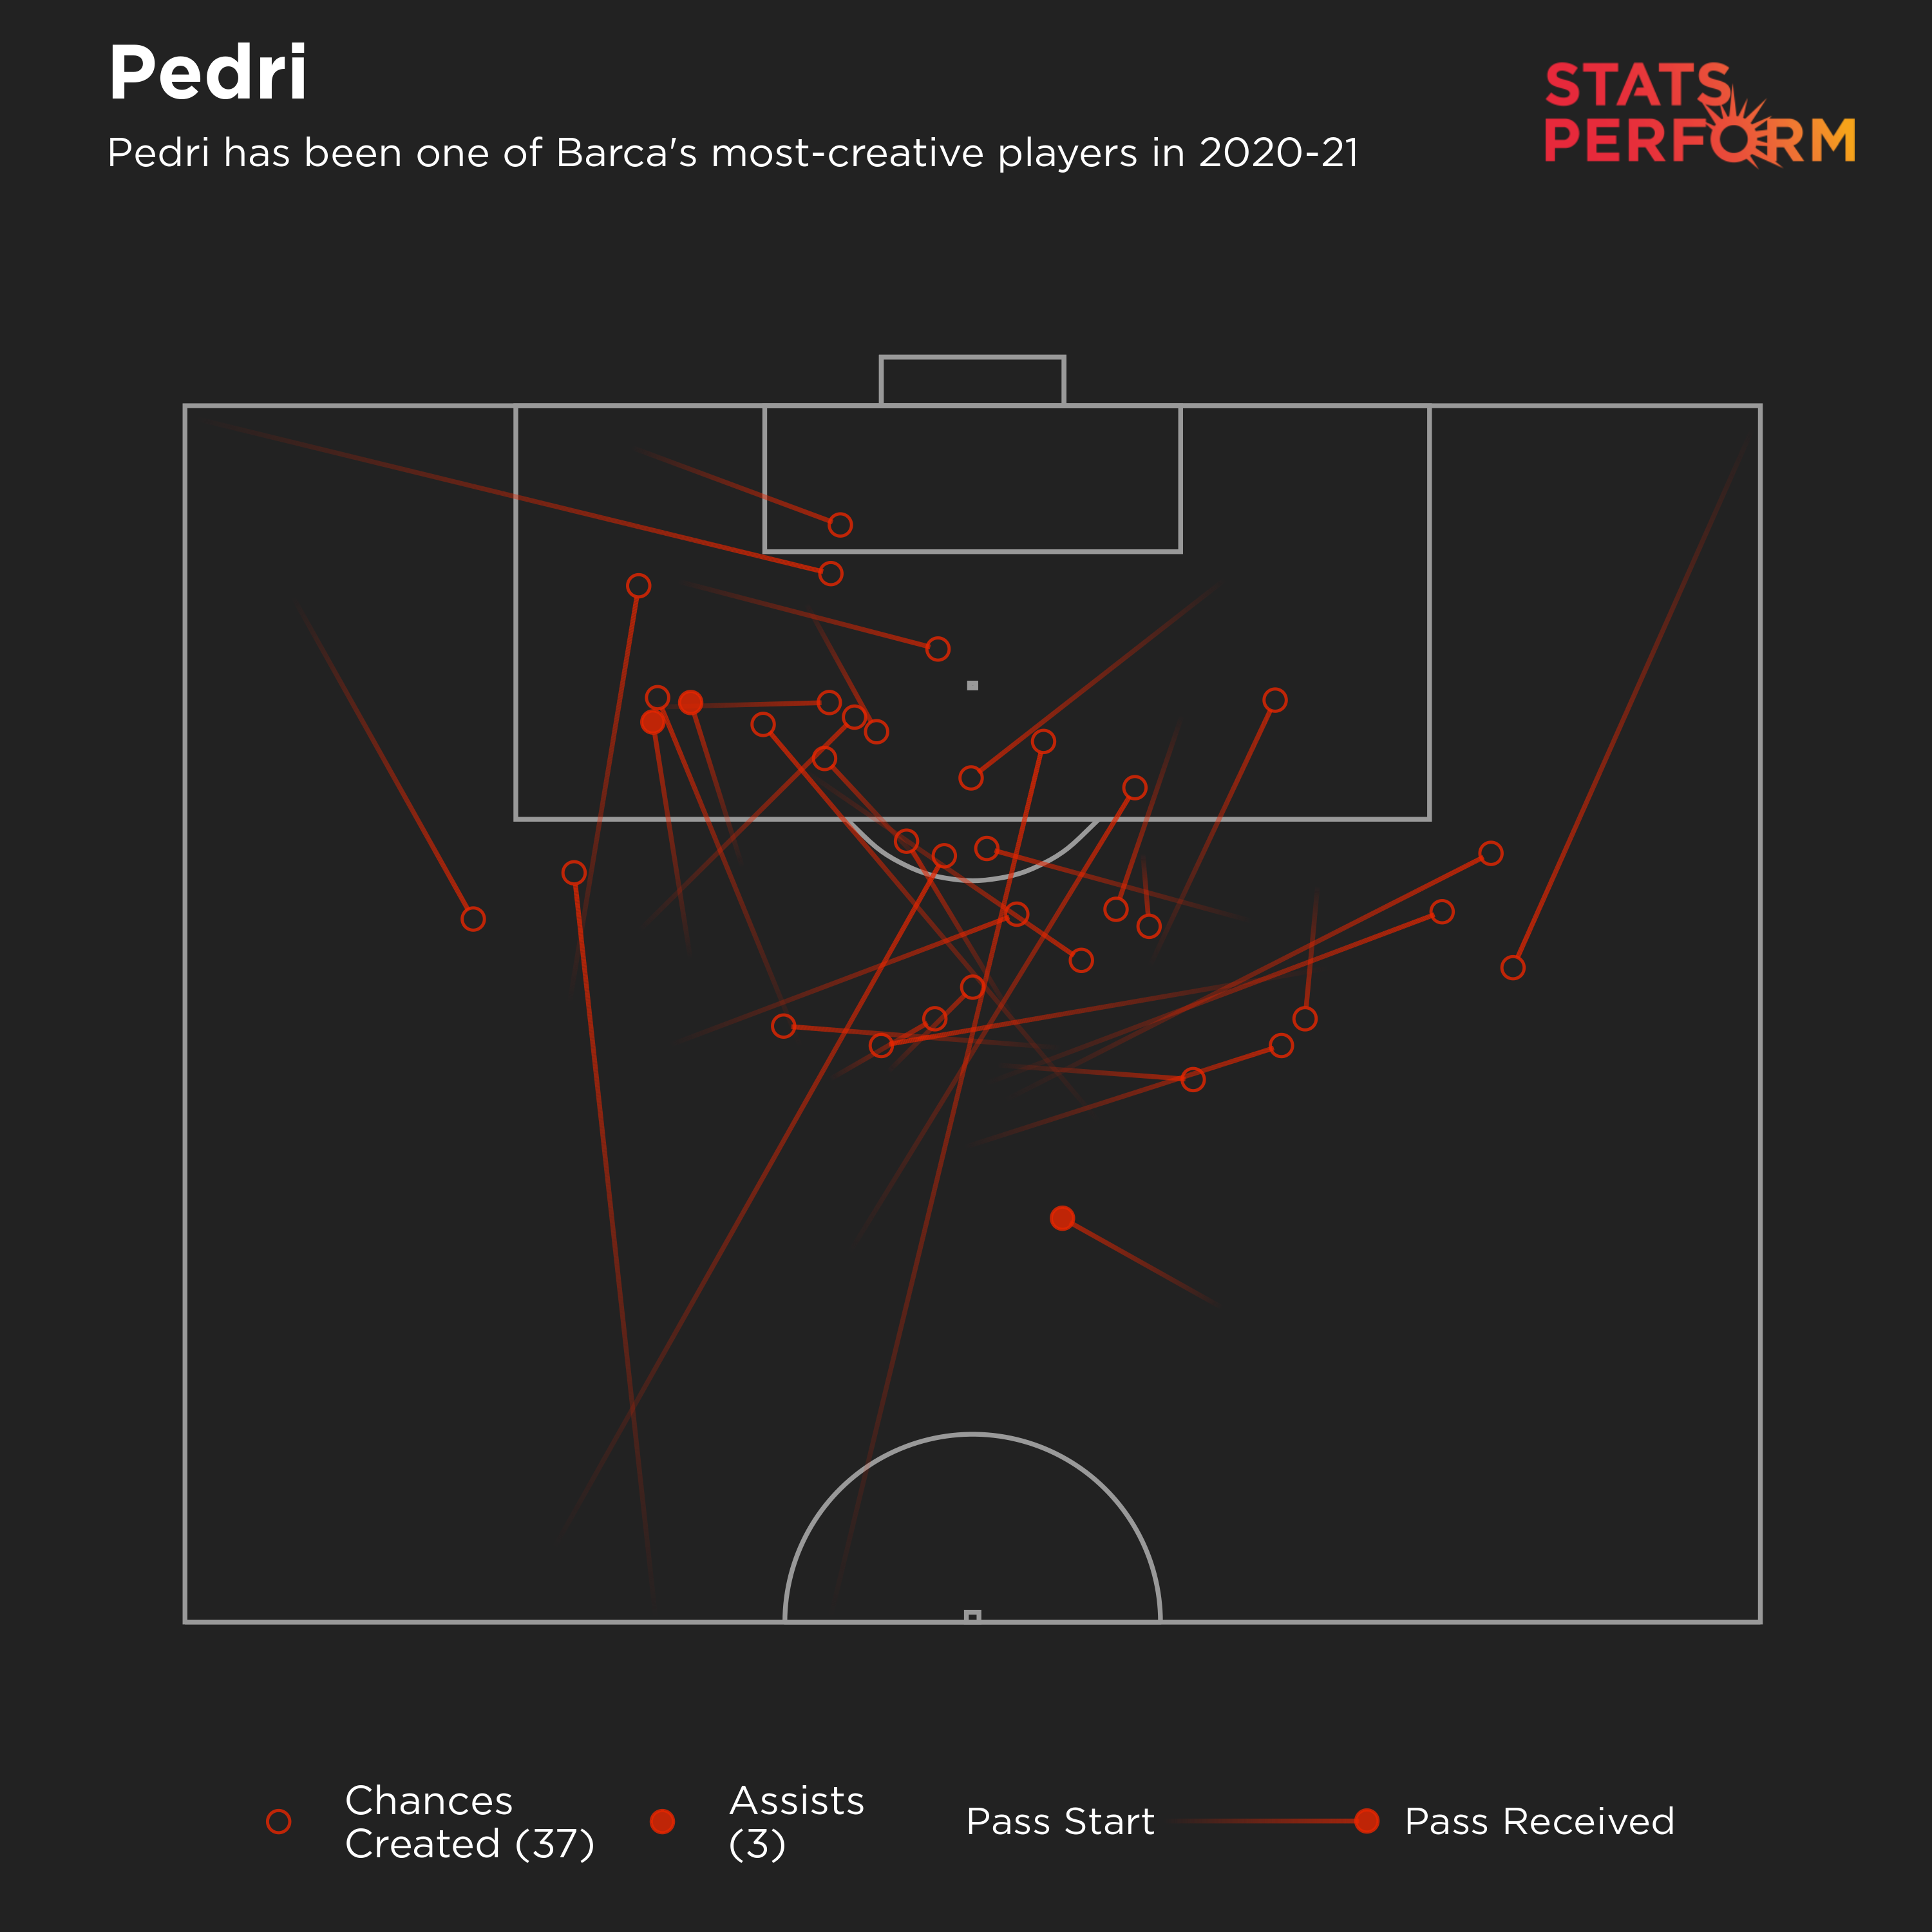 Only Lionel Messi and Jordi Alba have created more chances for Barca this season than Pedri